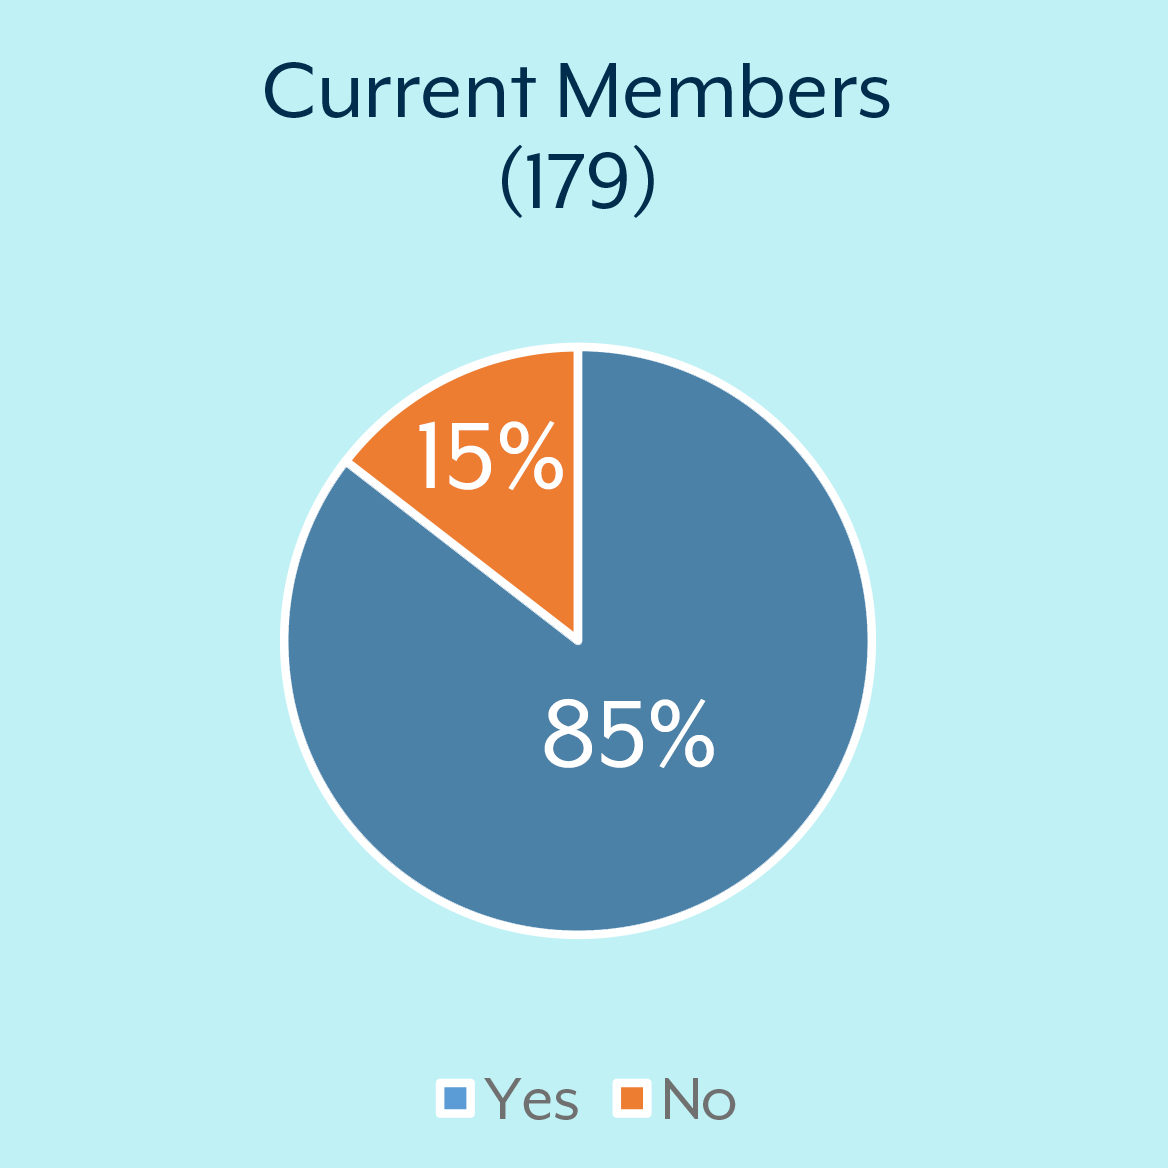 Current Members: 85% yes 15% no